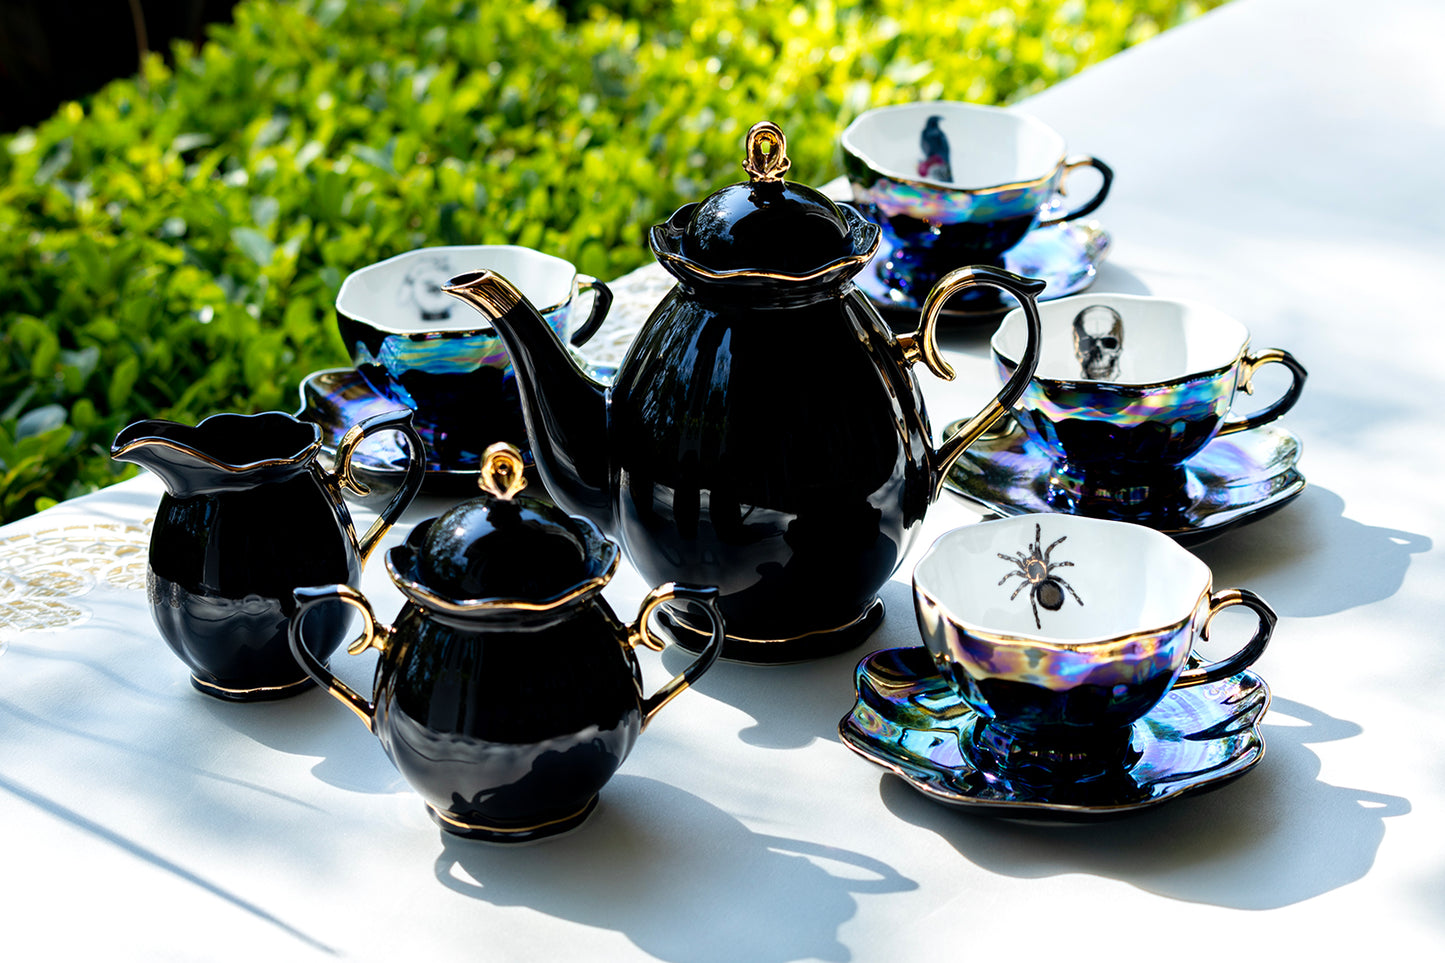 Grace Teaware Assorted Black Gold Luster Tea Cups and Saucers 11-Piece Tea Set, spider, skull, crow, witchy crystal ball tea cups